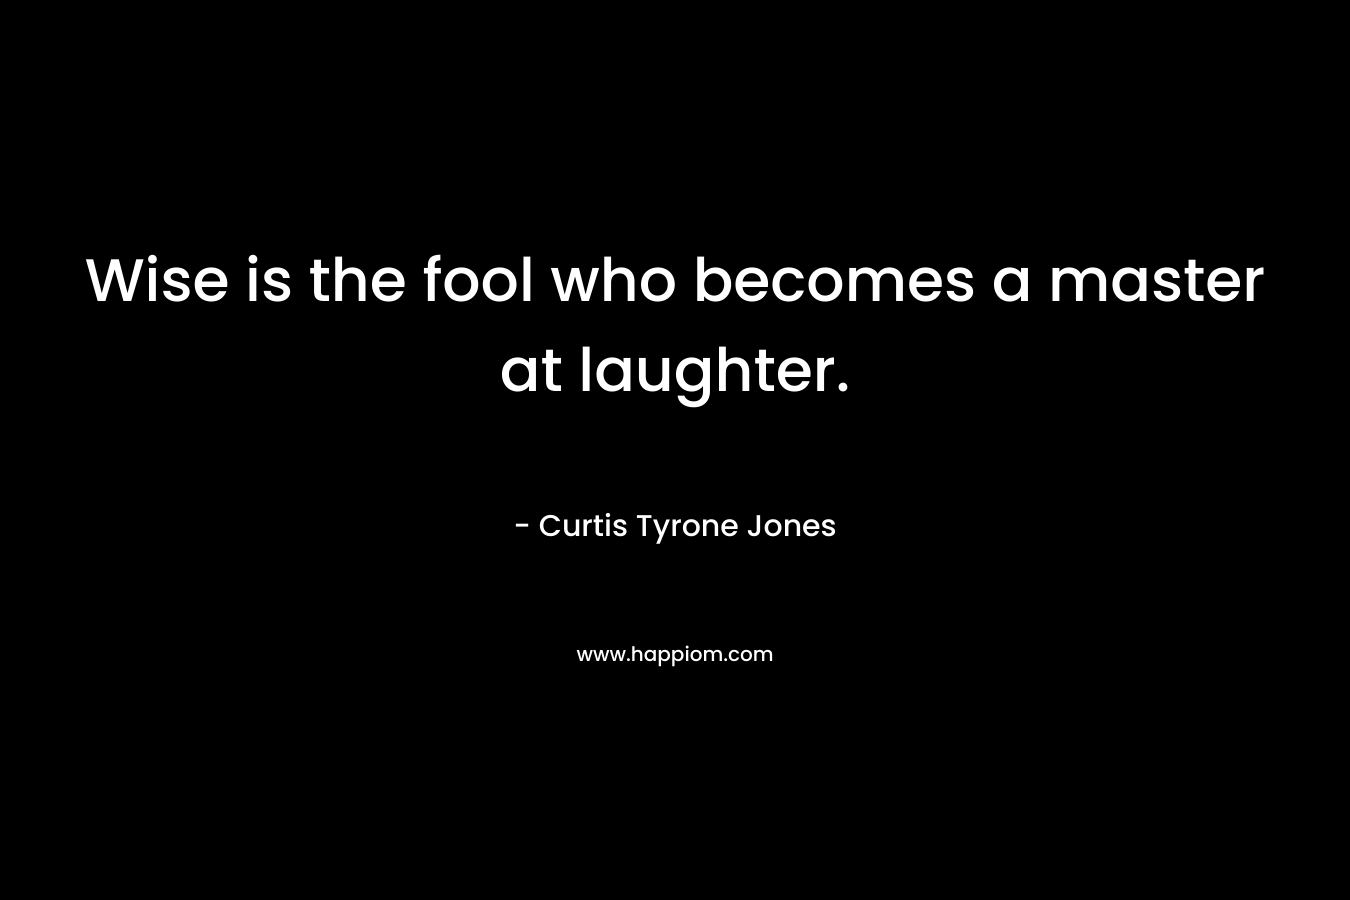 Wise is the fool who becomes a master at laughter.